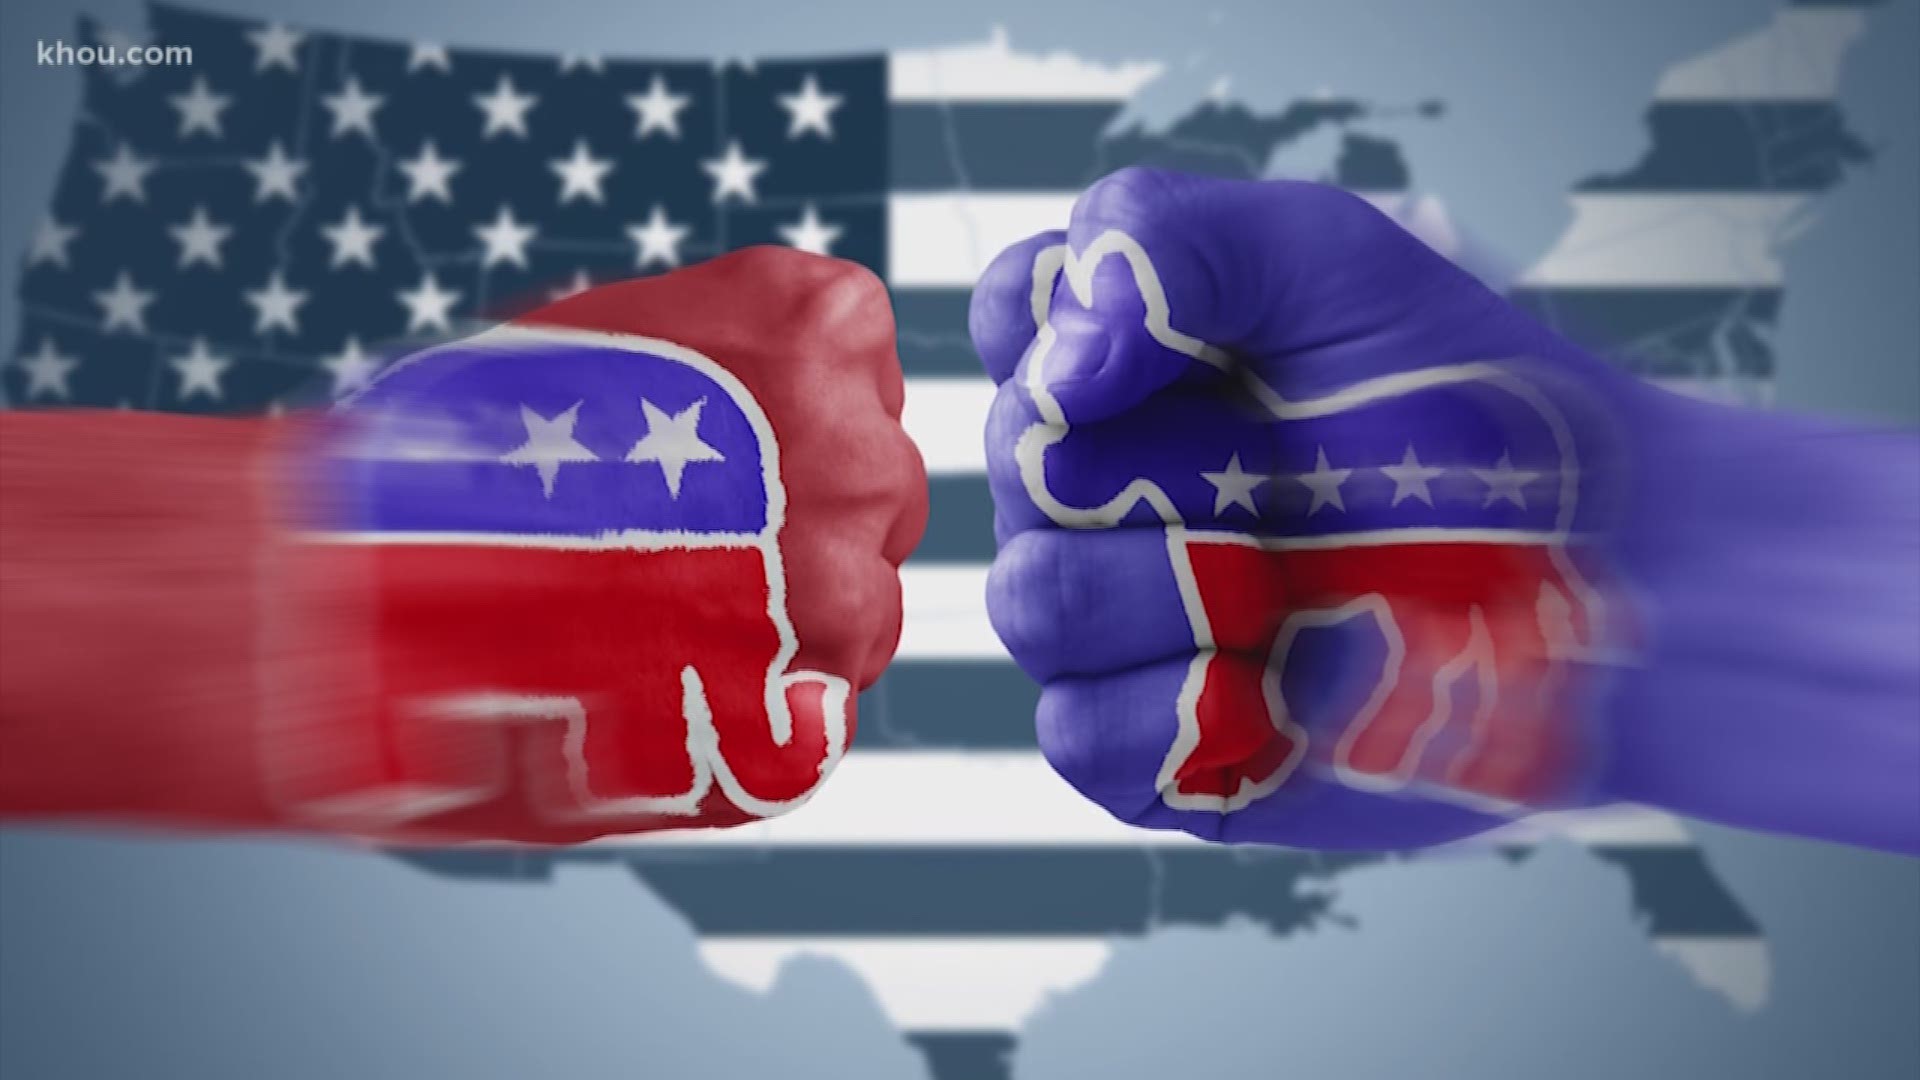 Politics and impeachment continue to highlight a polarized society. But, actually, republicans and democrats have many similarities.